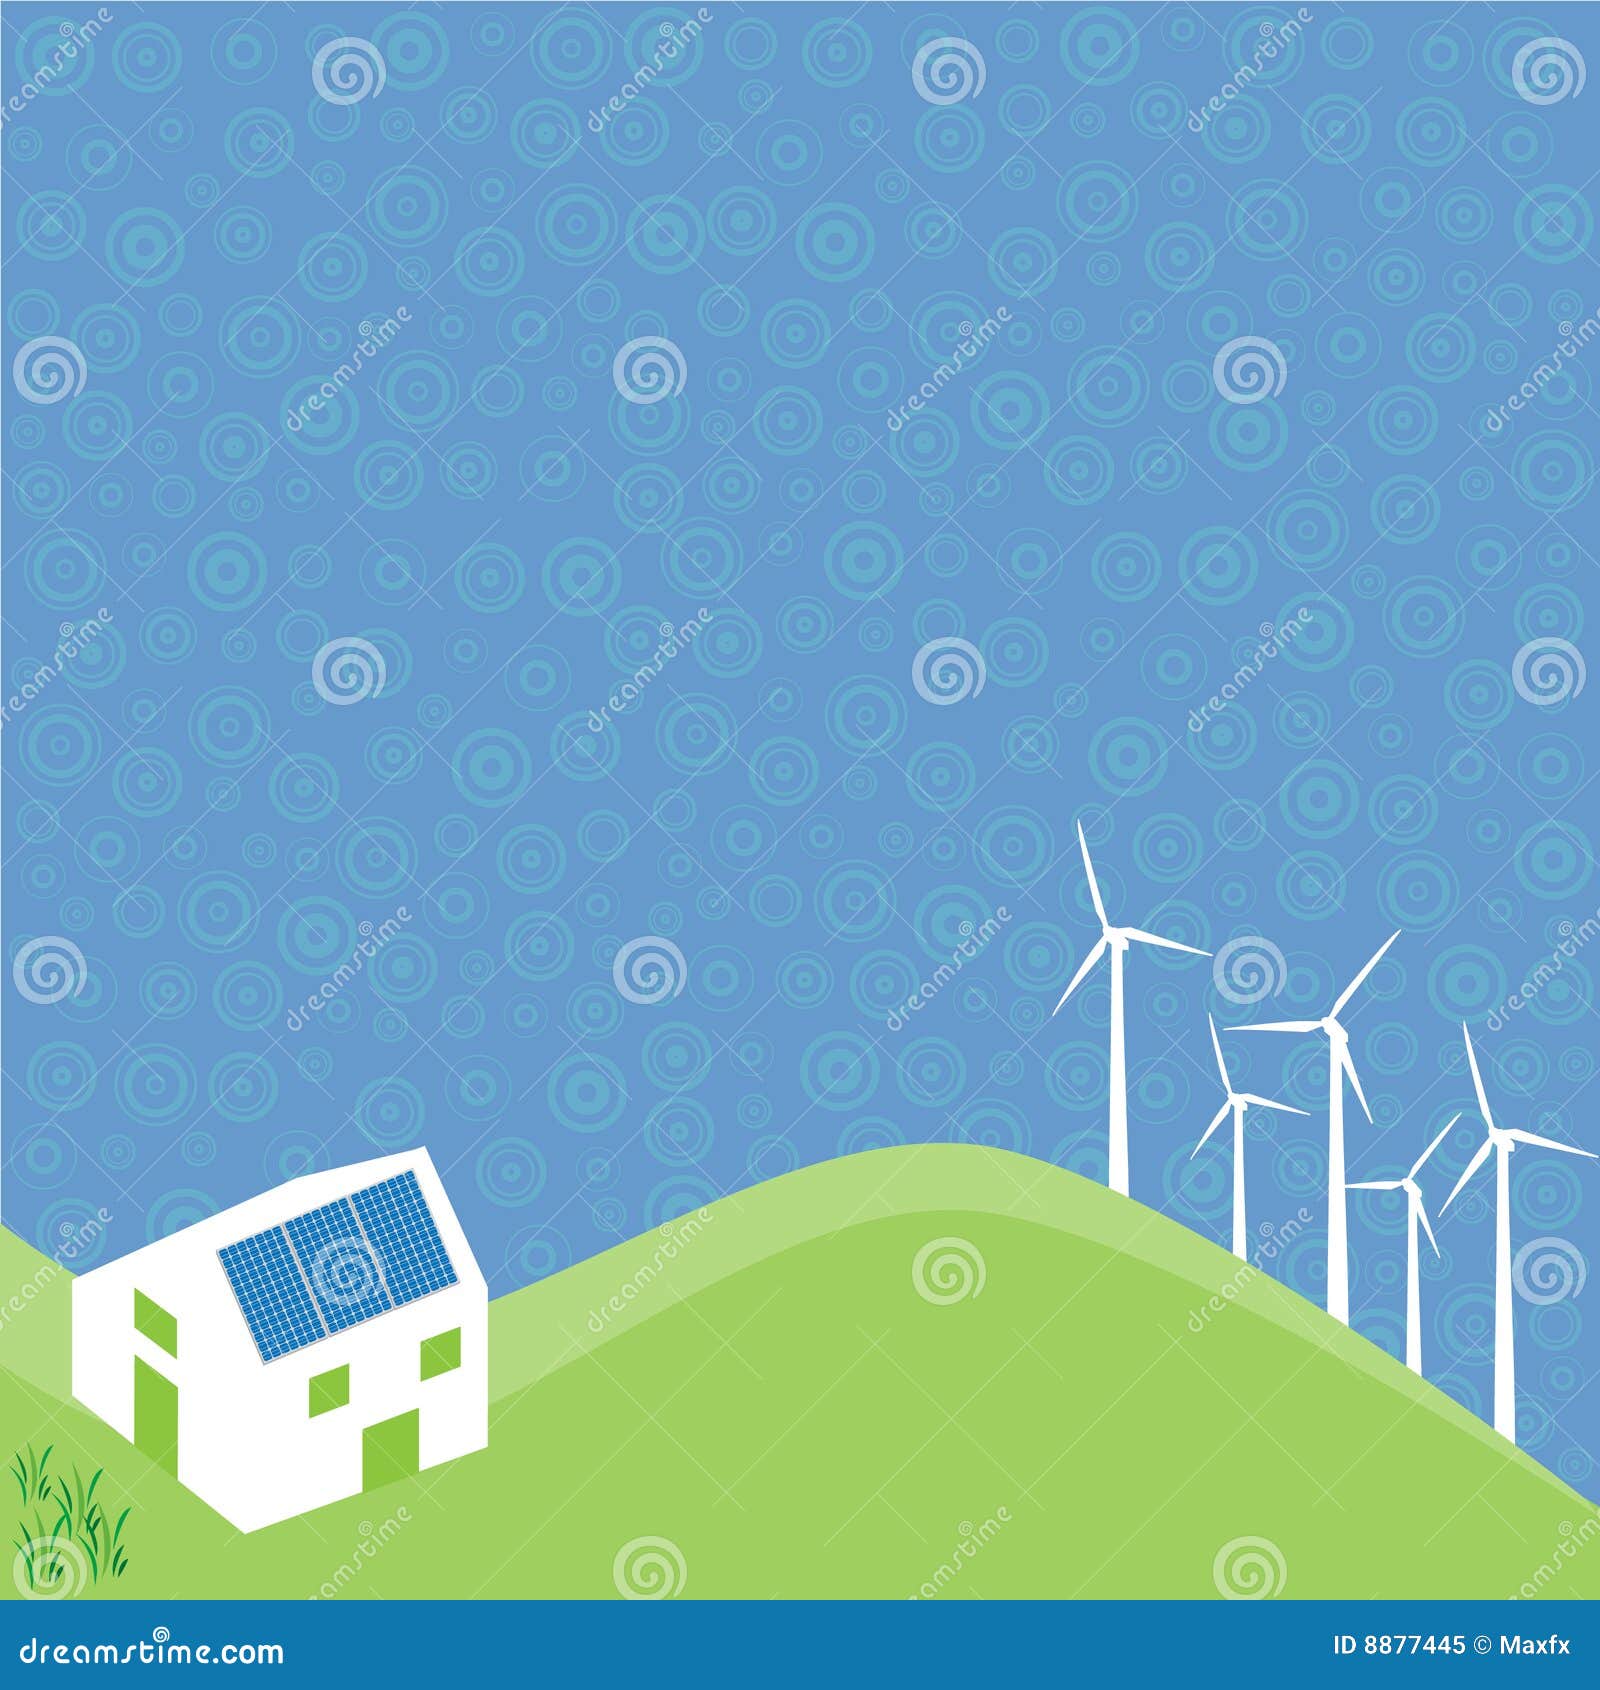 An introduction to the importance of the alternative energy sources